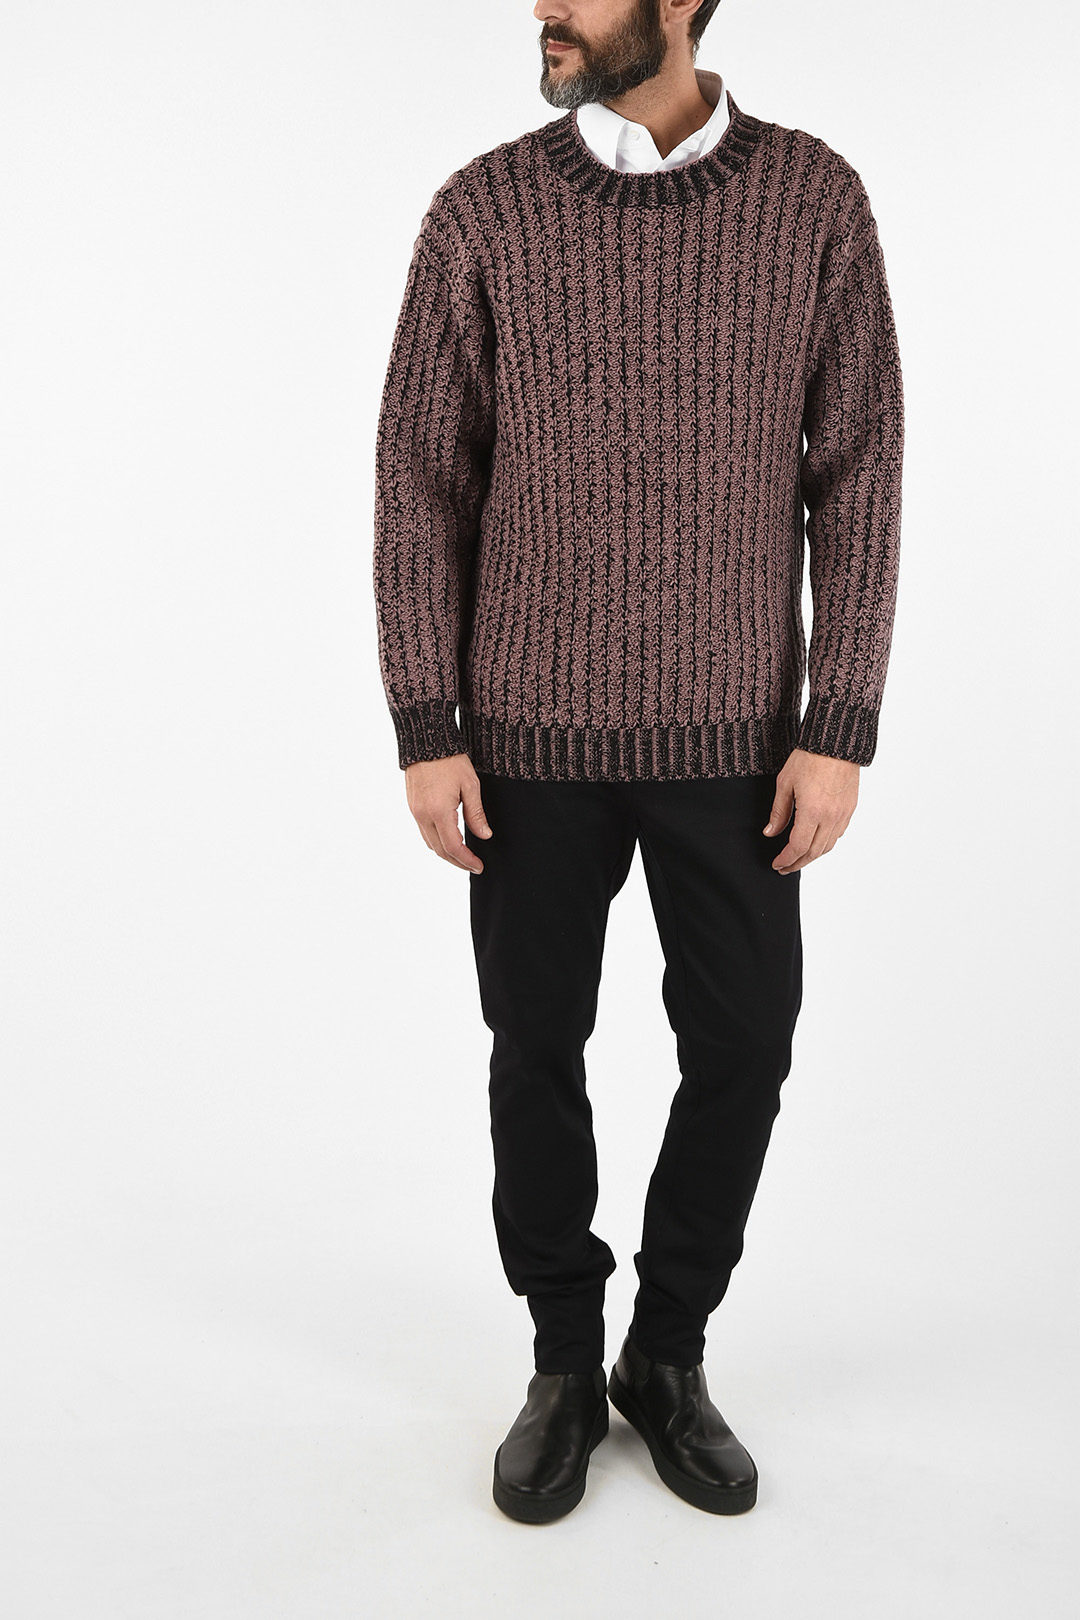 Salvatore Ferragamo Cable Knit Oversized Crew-neck Sweater men - Glamood  Outlet